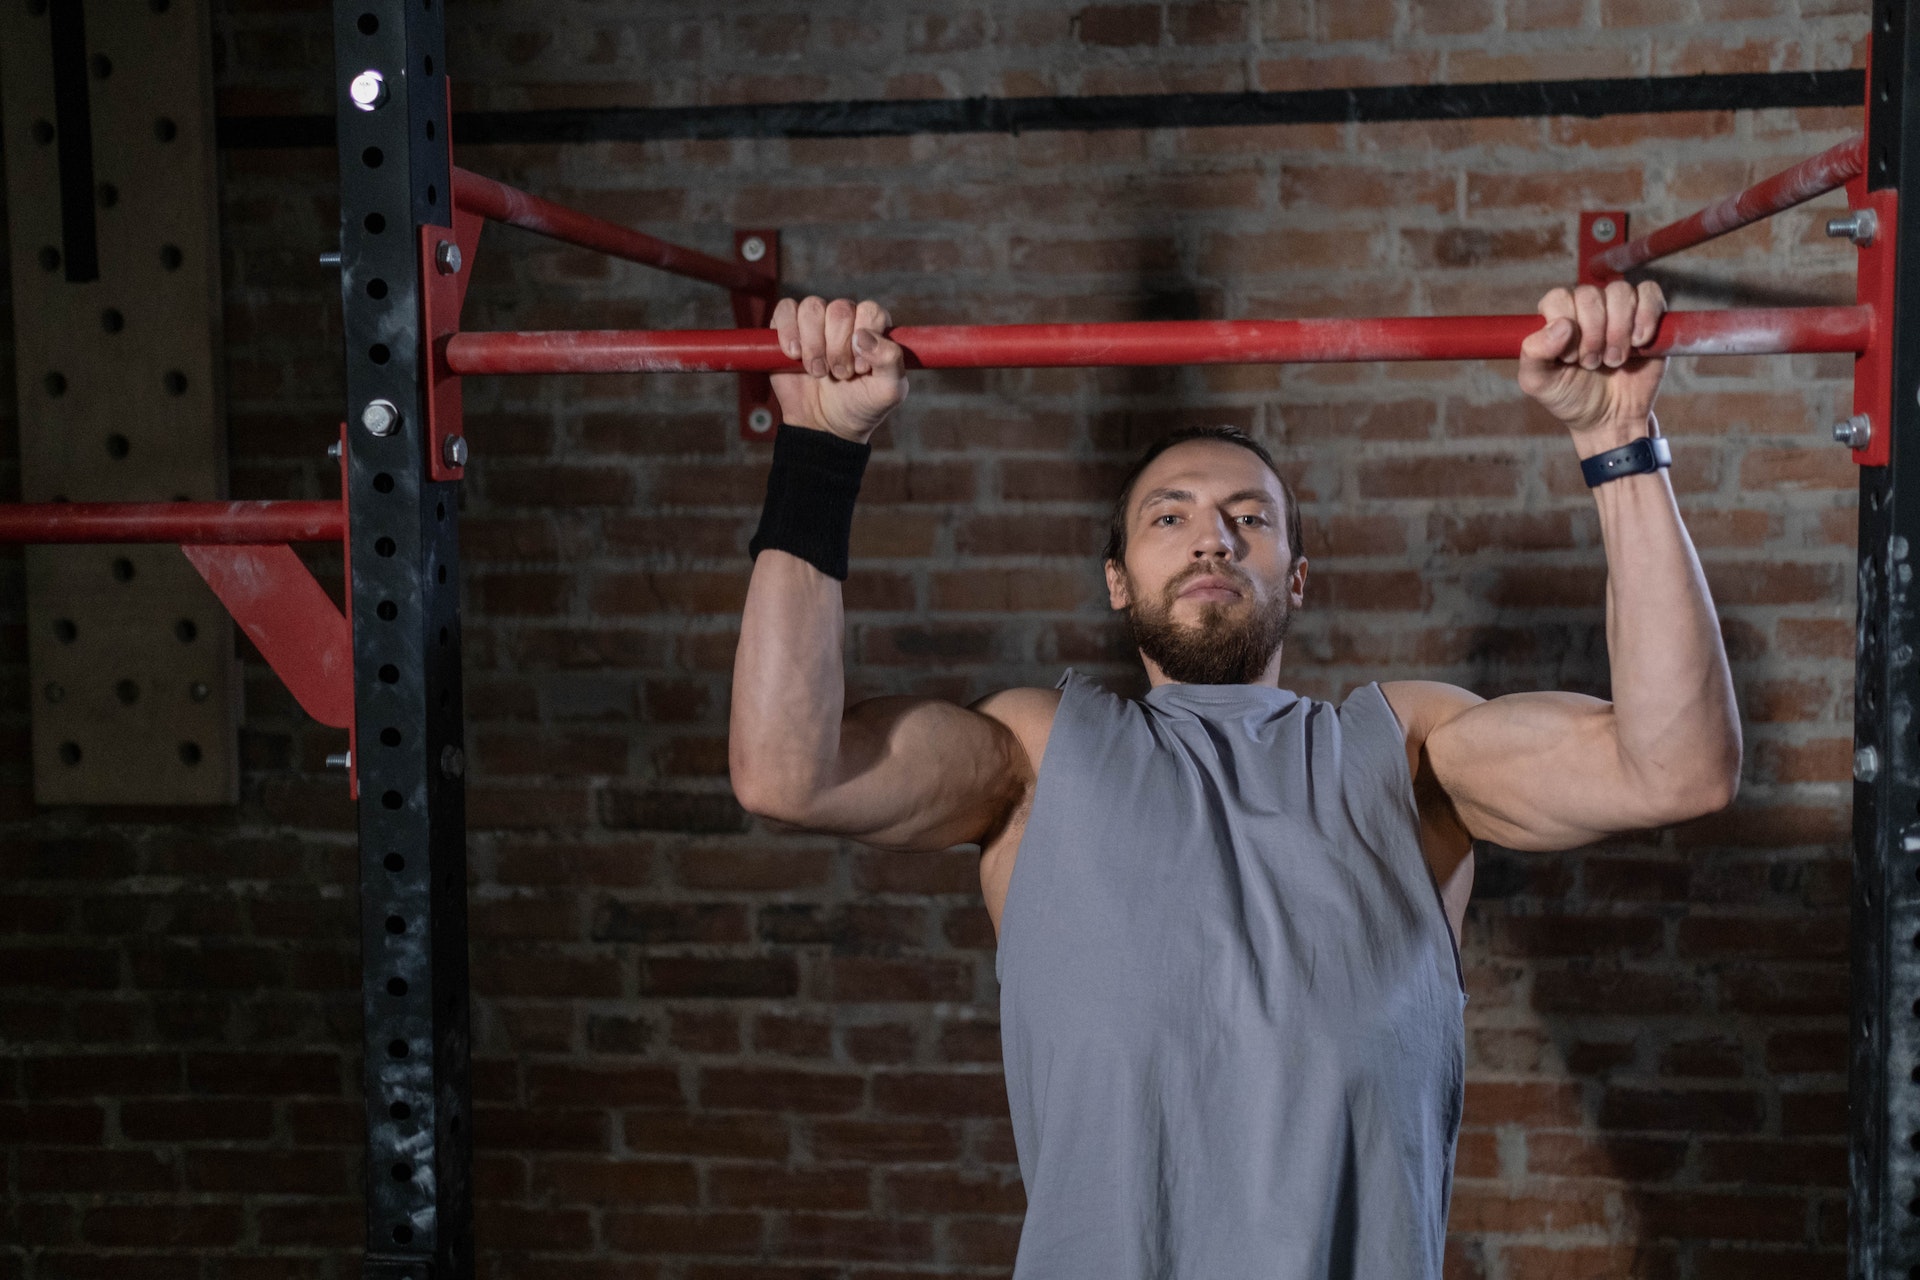 Neutral Grip Pull Up: Benefits, Muscles Worked, and More - Inspire US